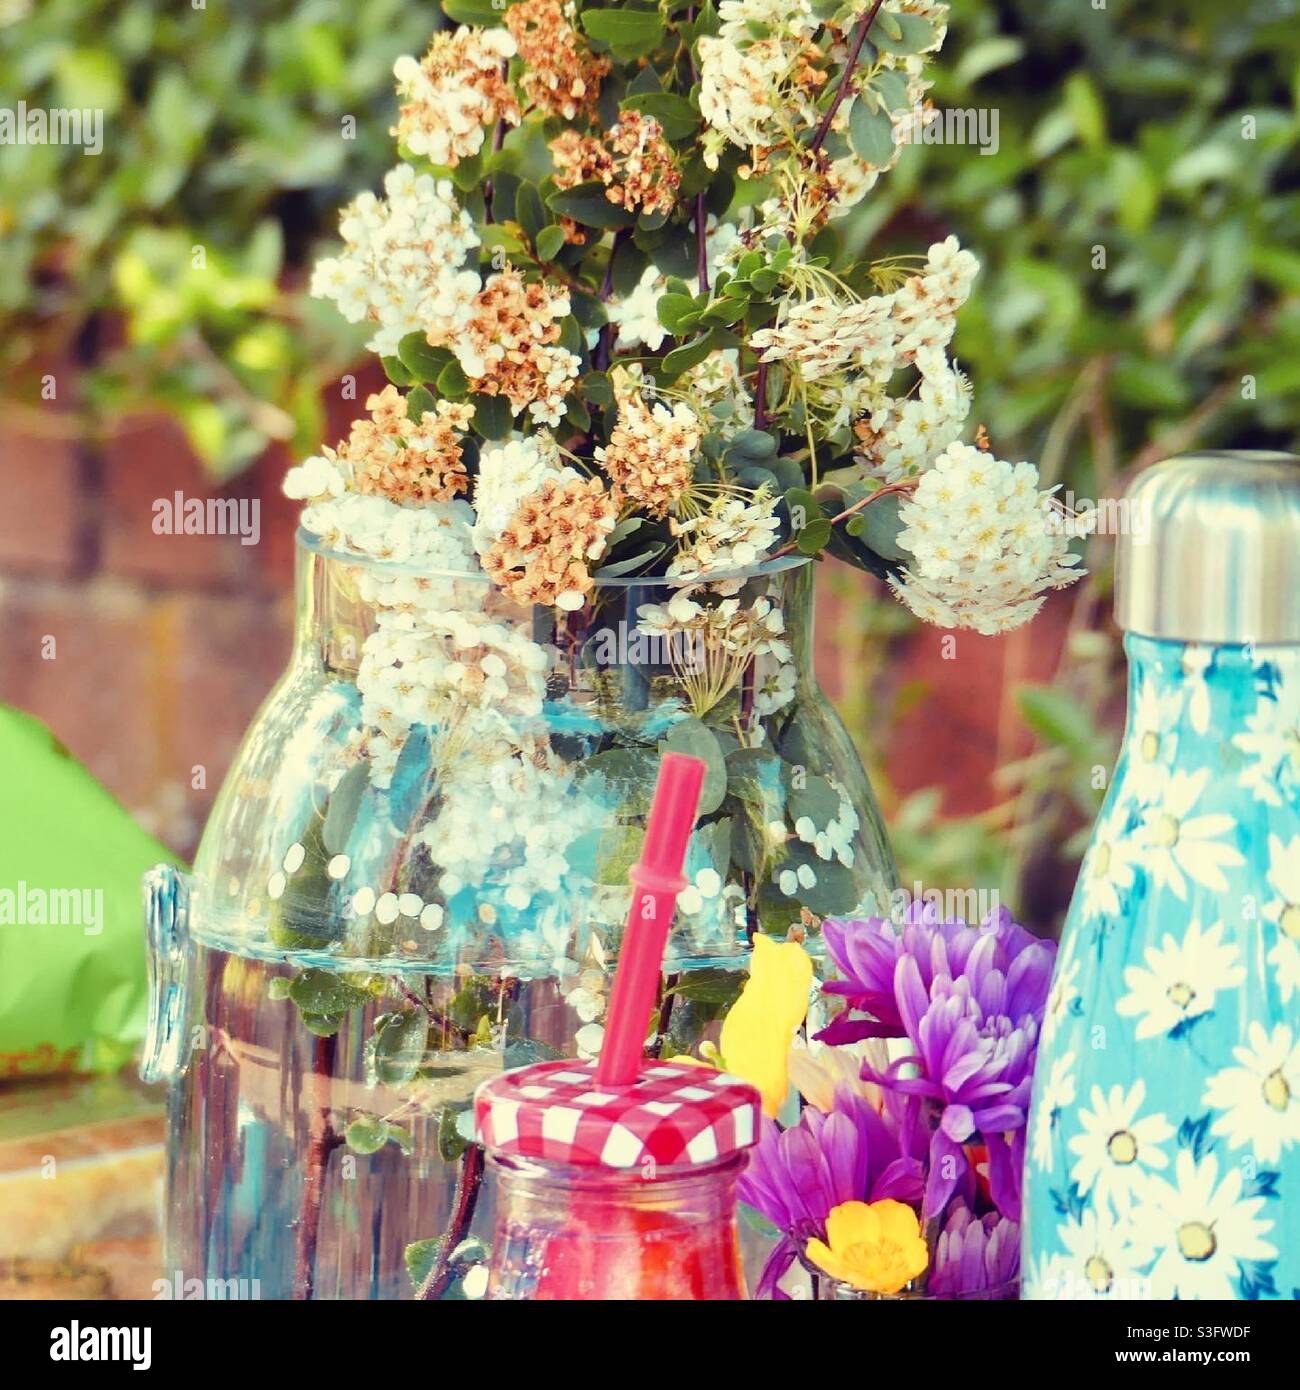 Vase of flowers at a garden party Stock Photo